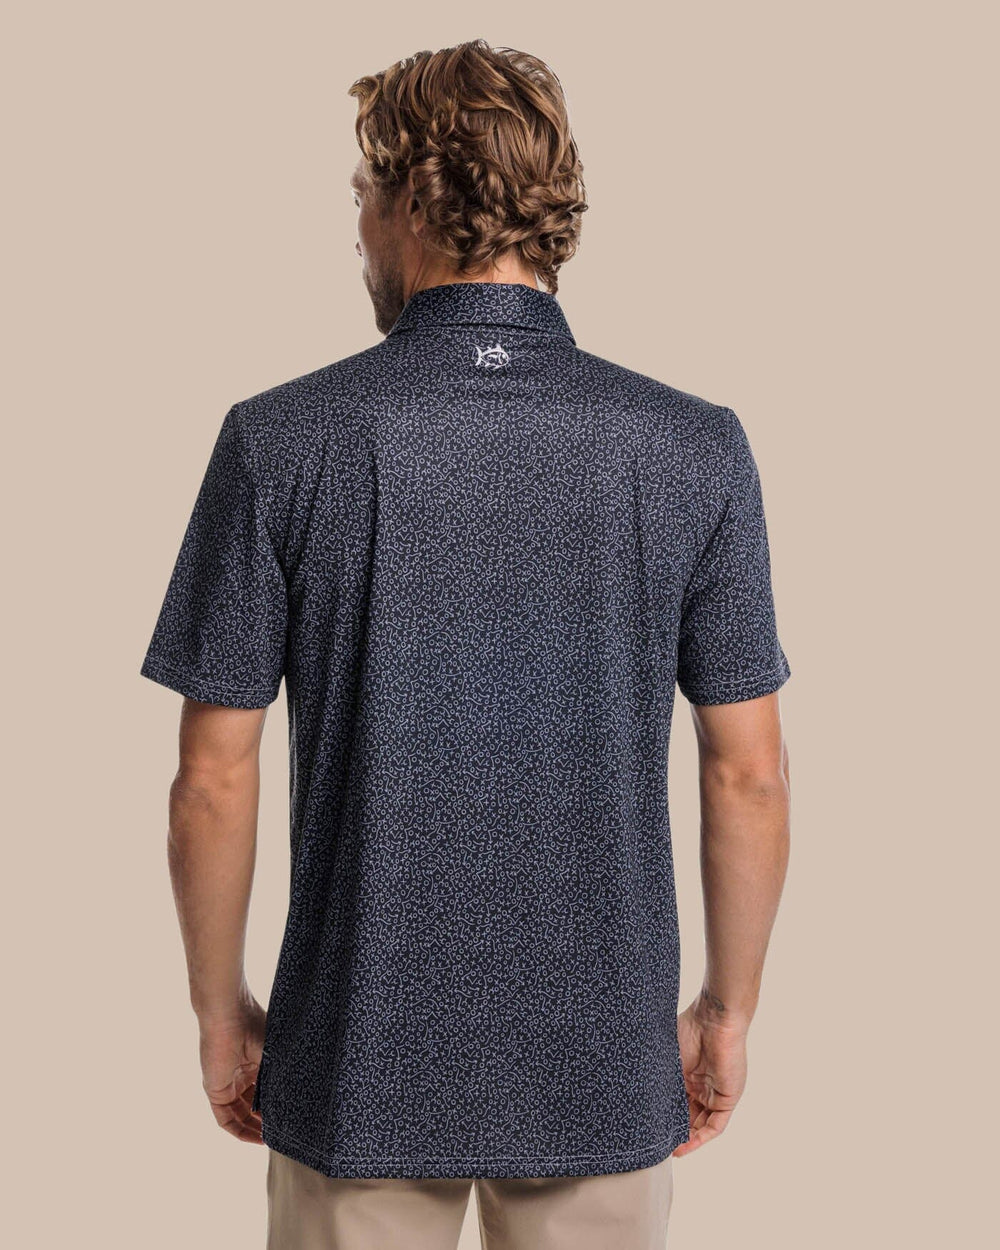 The back view of the Southern Tide Driver Gameplay Polo by Southern Tide - Black